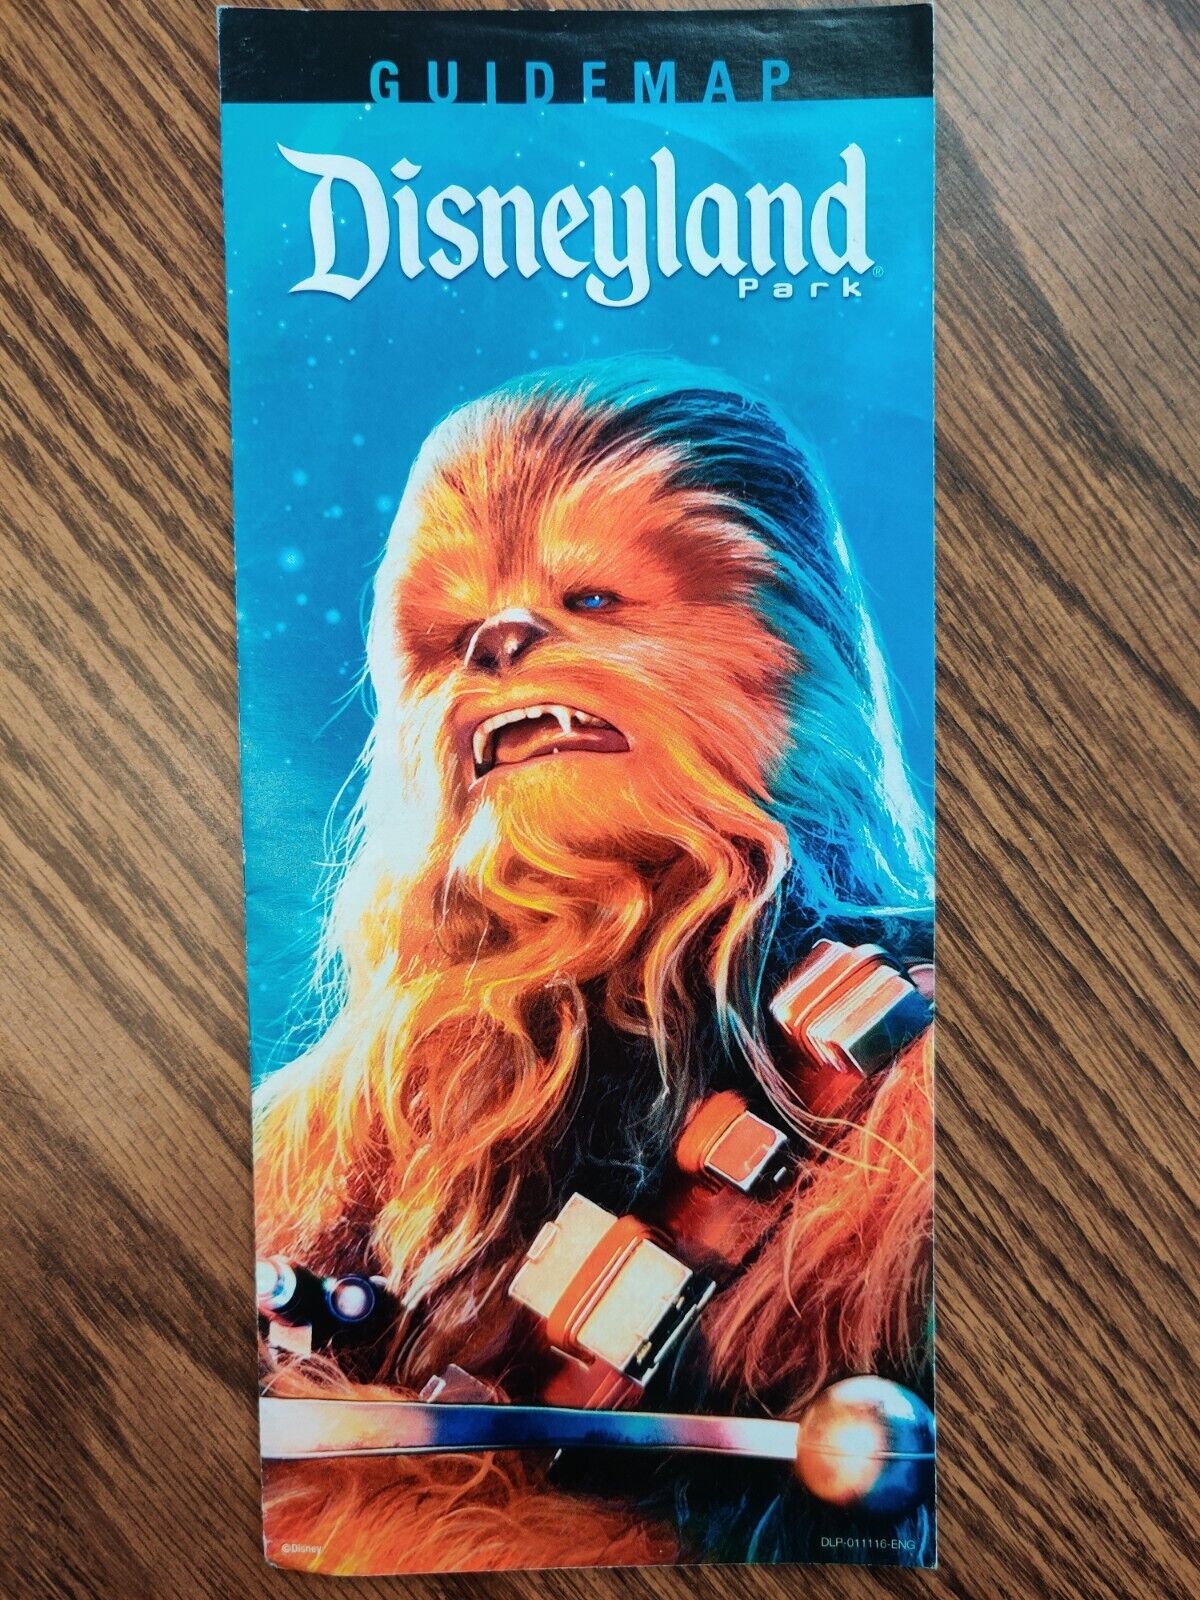 Rare 2016 Disneyland Star Wars Chewbacca Theme Guide Map - Collector's Edition